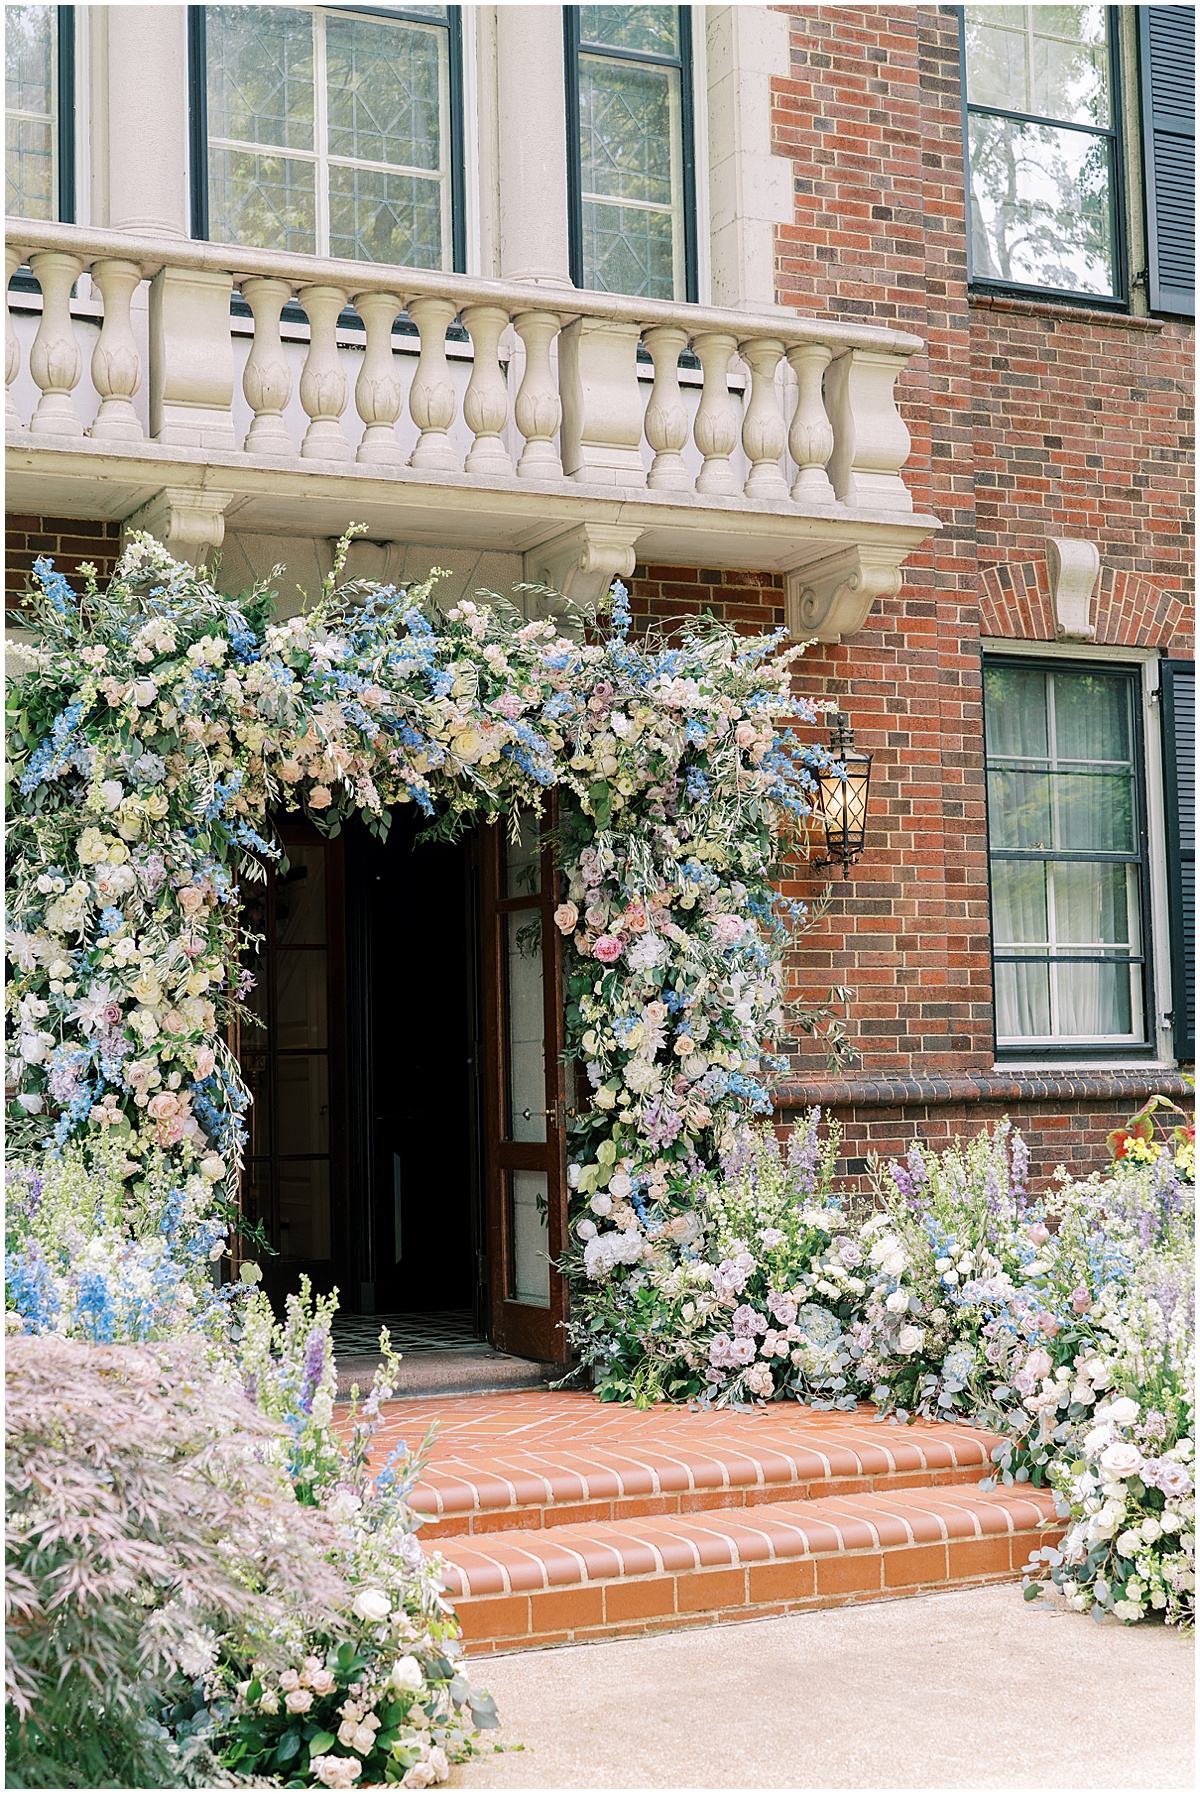 Grand Floral Entry Arch Over Doorway © Bonnie Sen Photography 